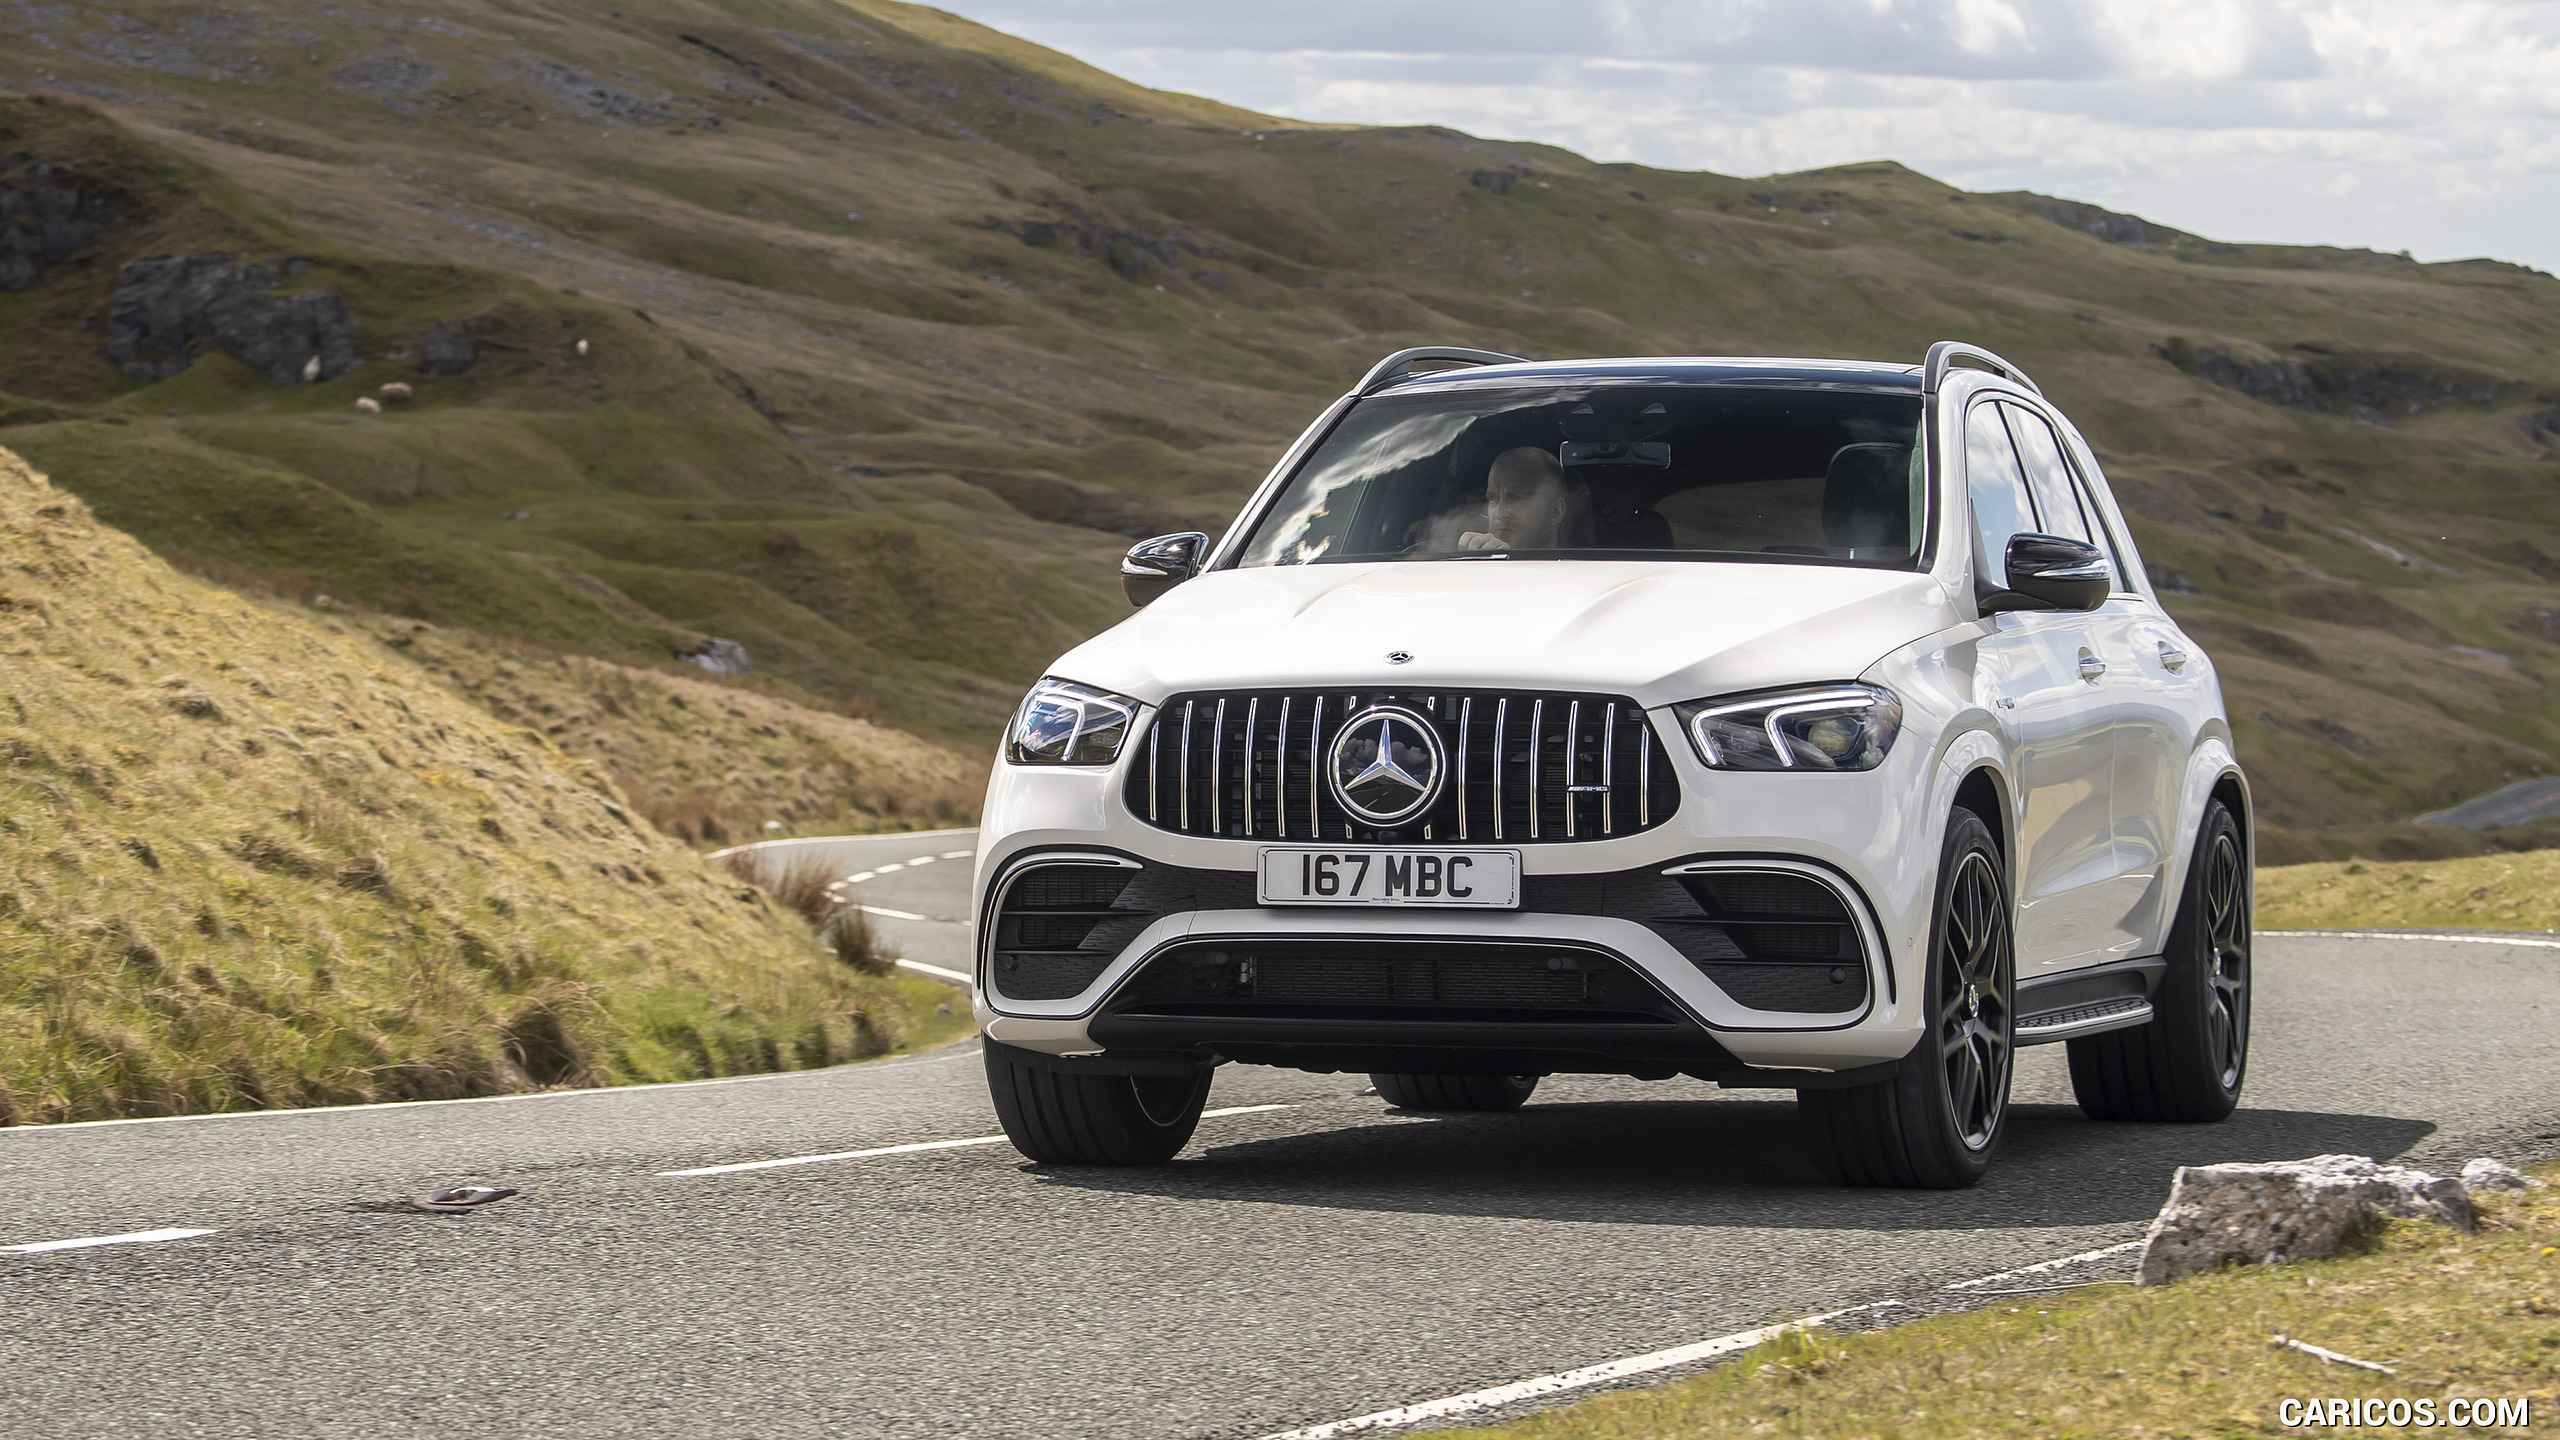 2021 Mercedes-AMG GLE 63 S 4MATIC (UK-Spec) - Front, #99 of 187